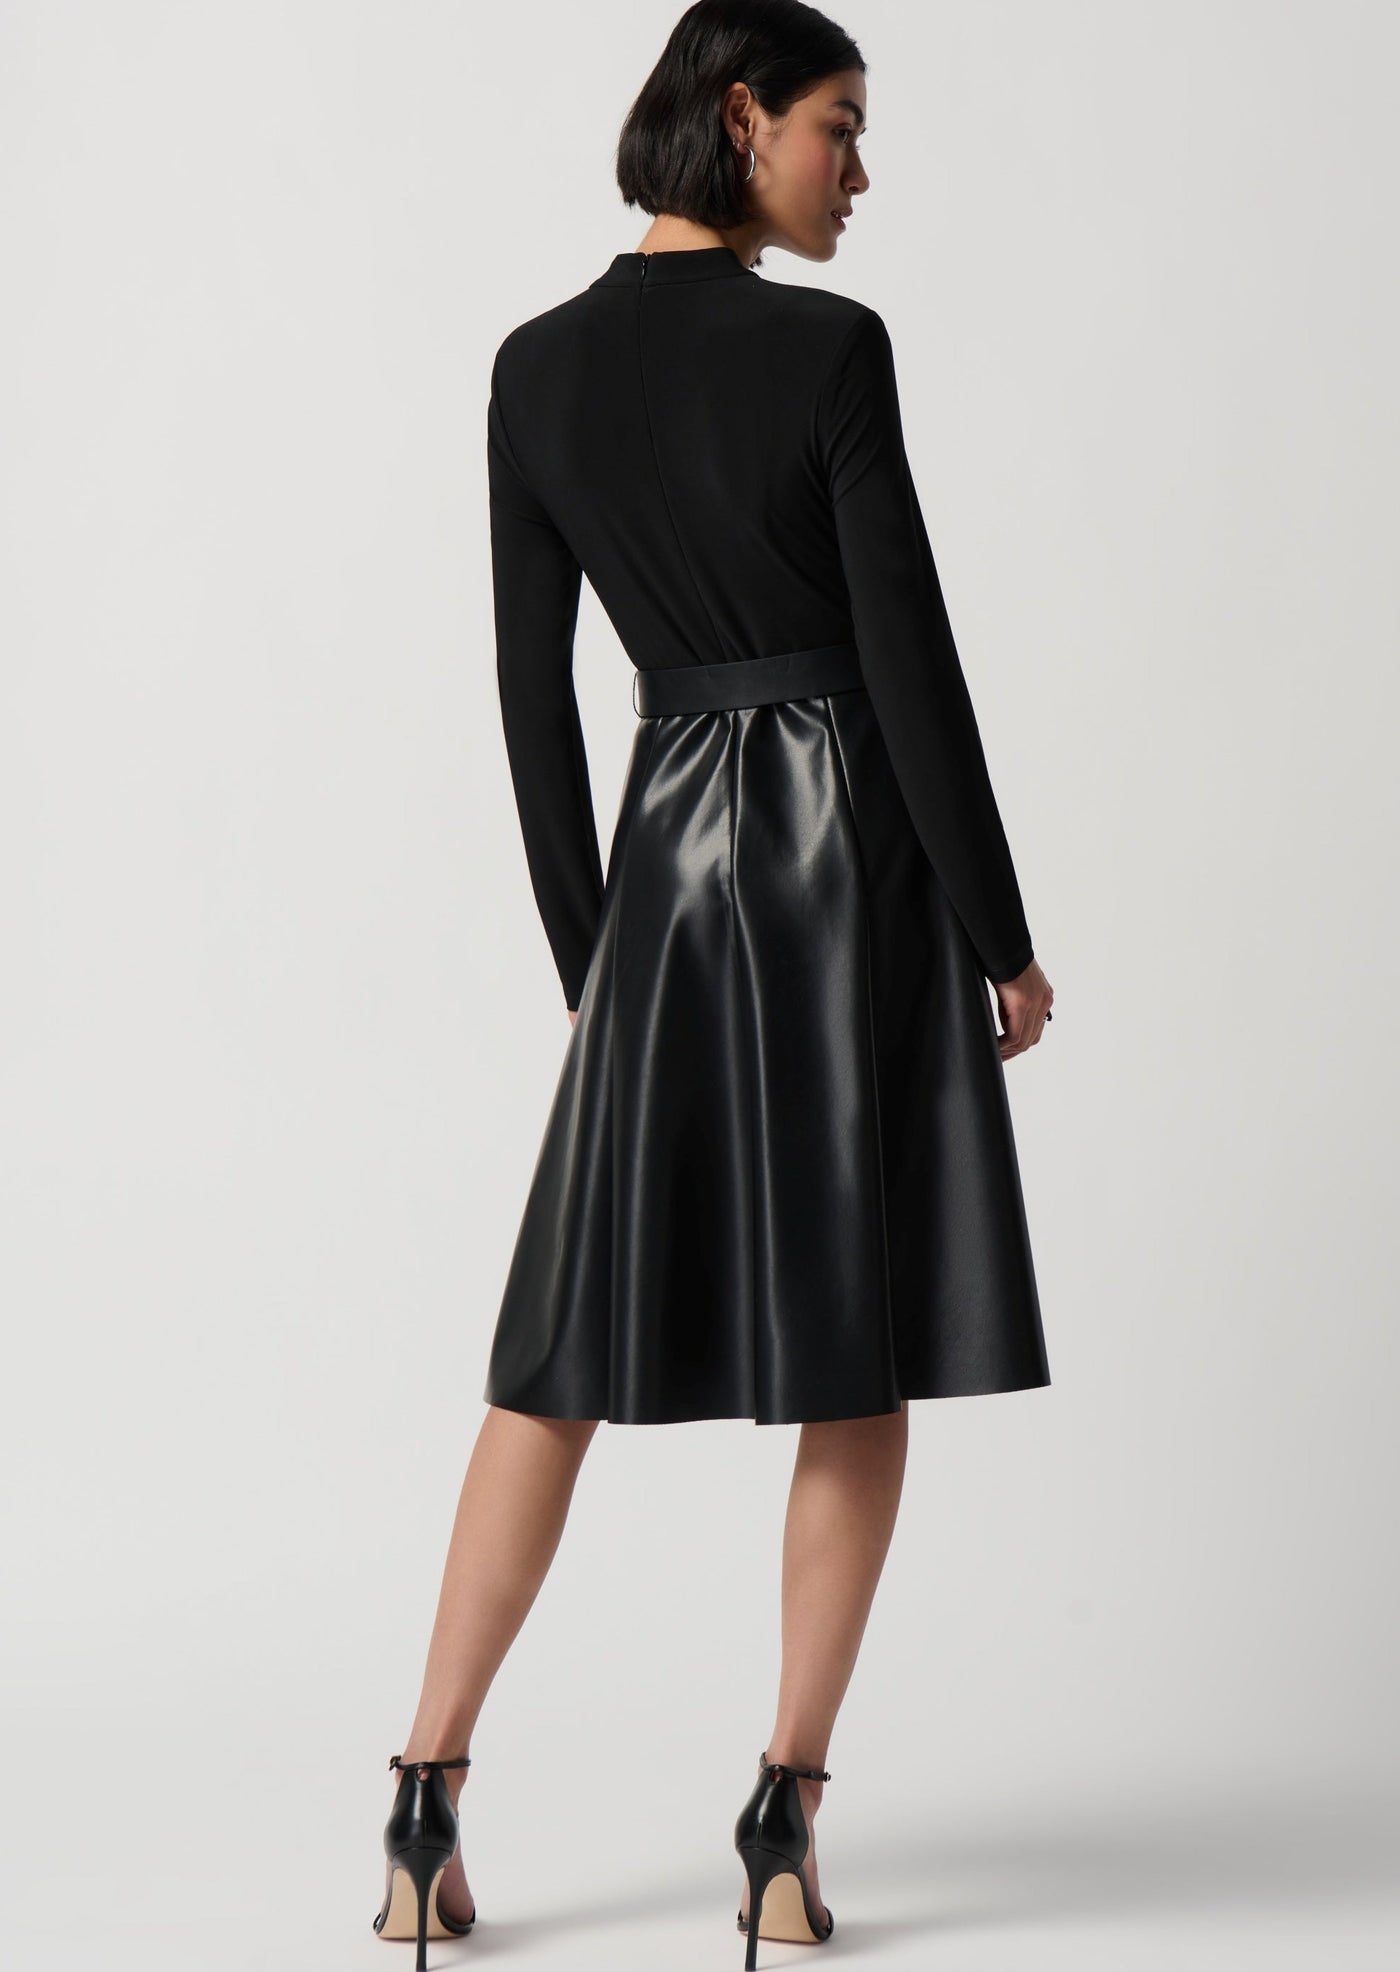 Joseph Ribkoff - Knit and Faux Leather Fit-and-Flare Dress